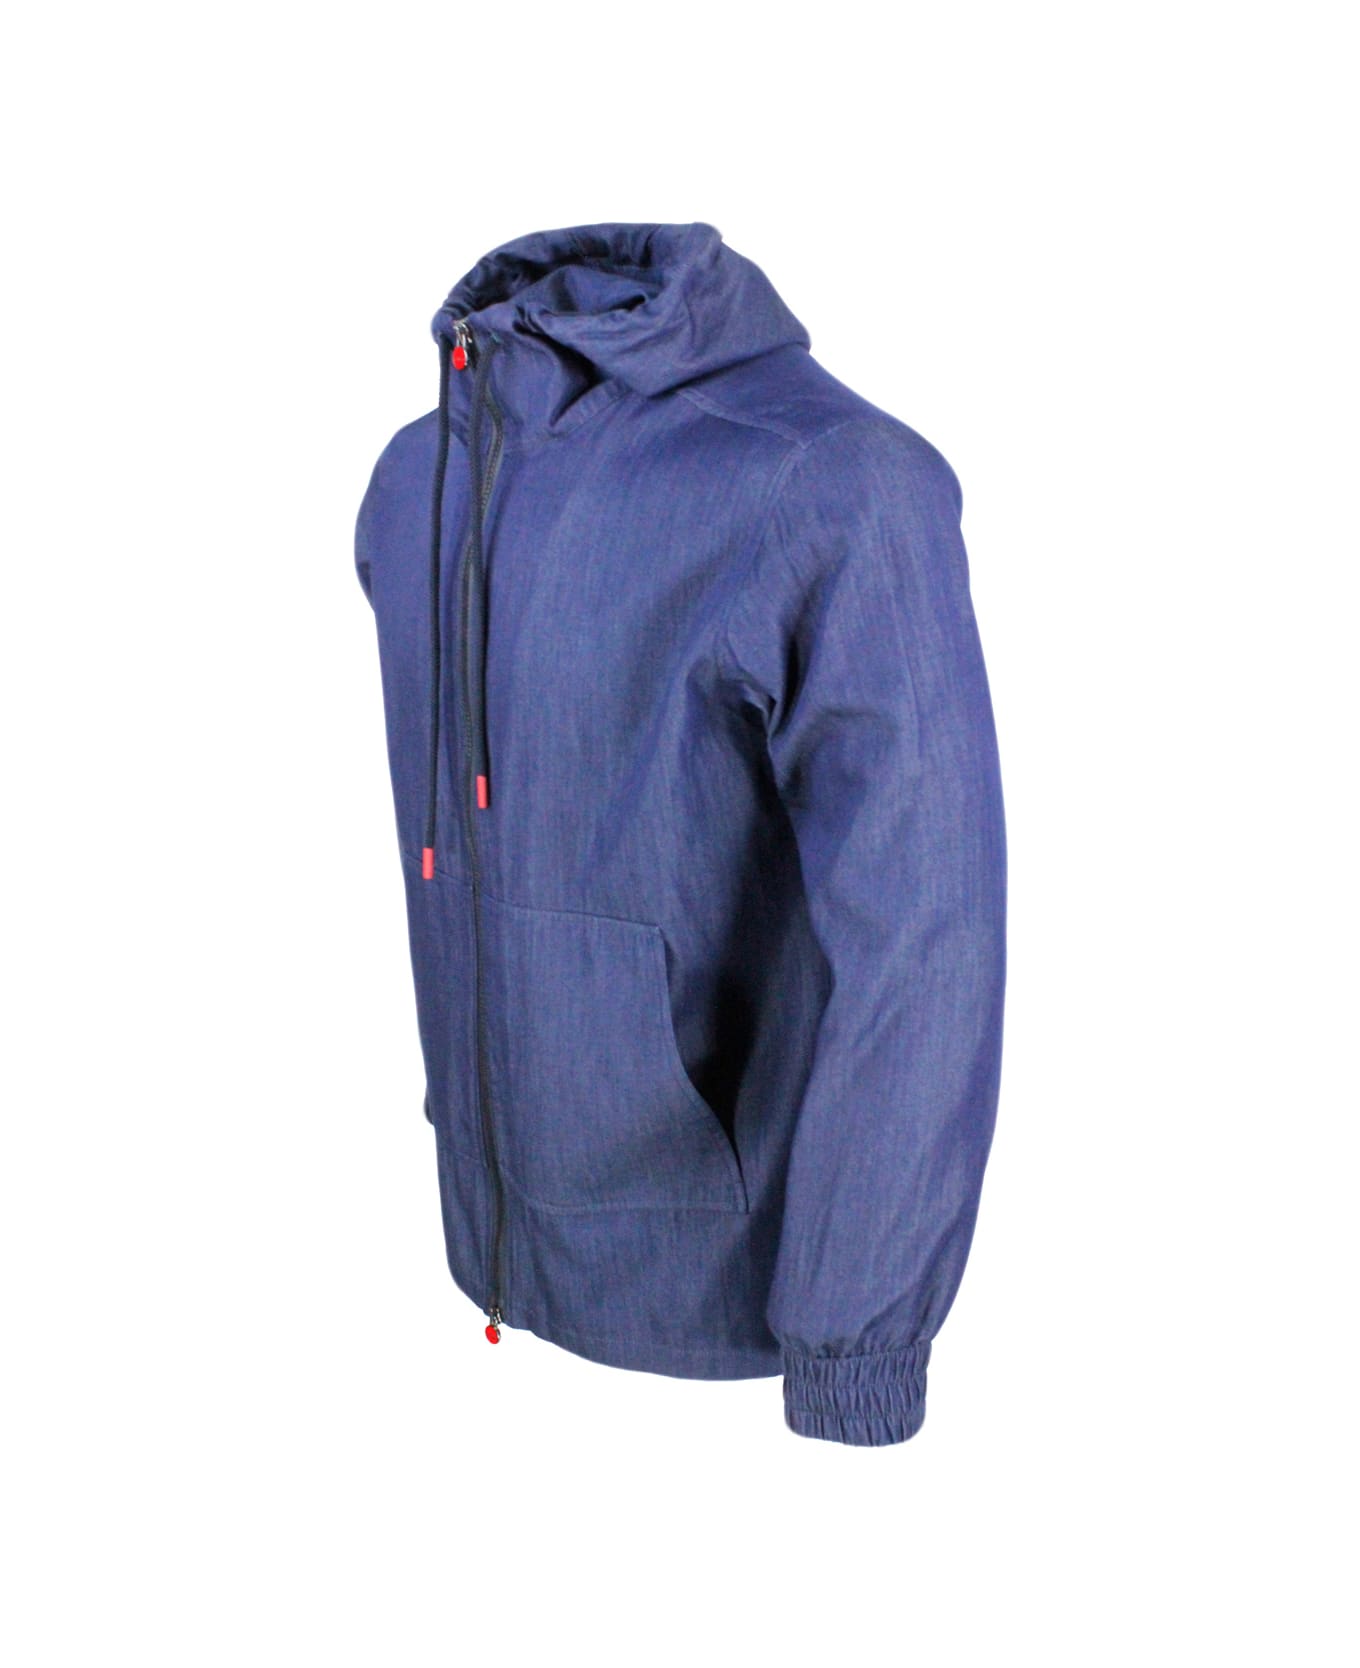 Kiton Super Light Sweatshirt Jacket With Hood In Very Soft Denim-effect Cotton Fabric With Zip Closure With Logo On The Zip Puller - Blu denim